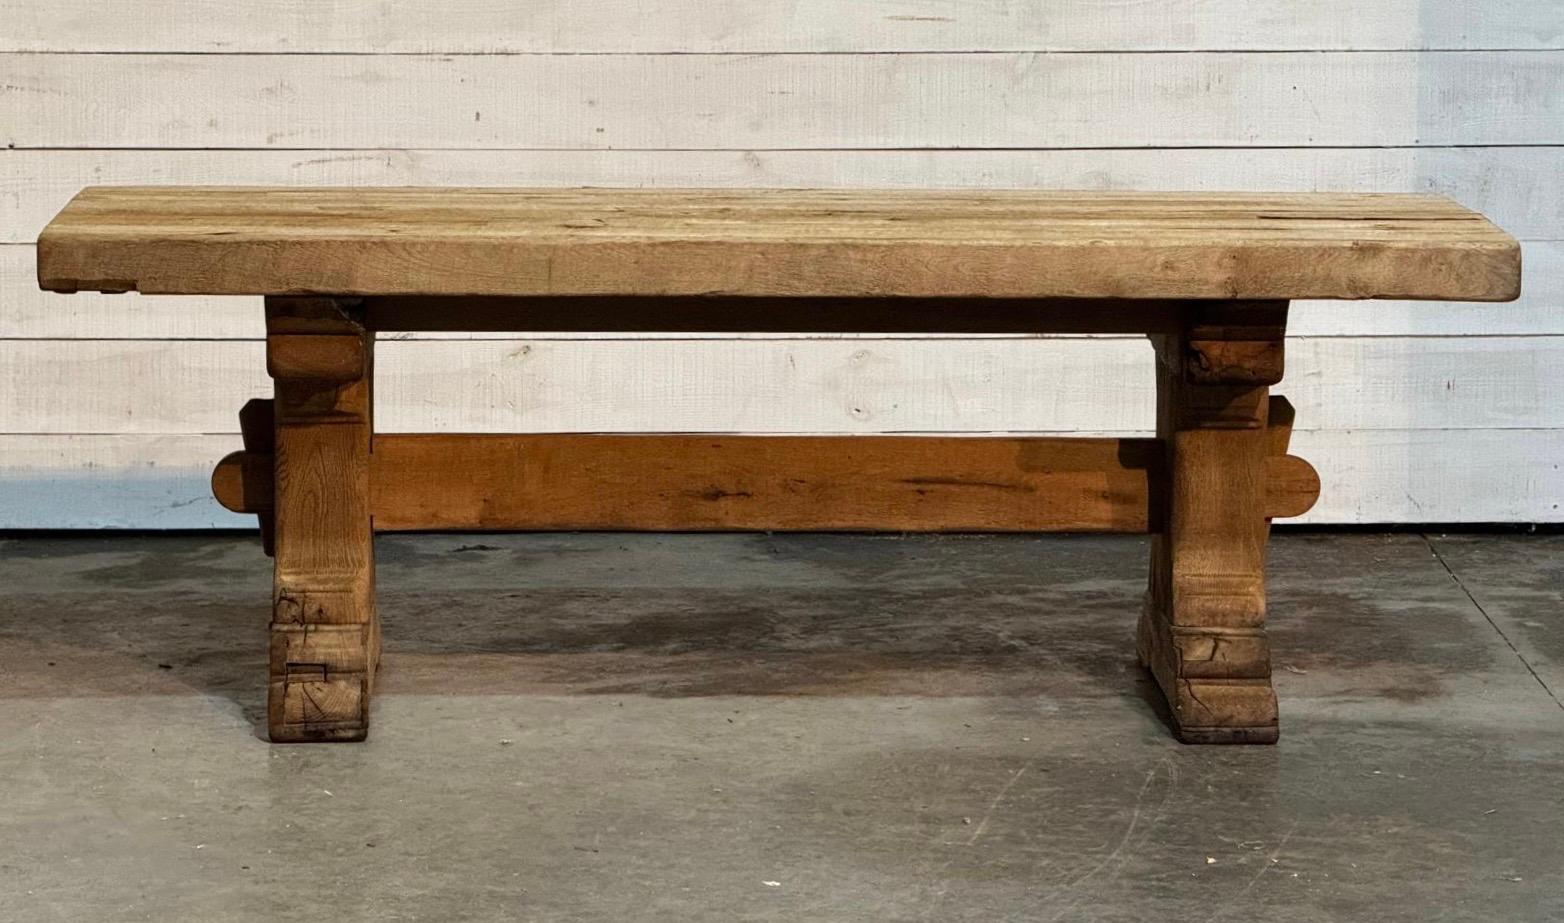 A superb quality French Solid Oak Farmhouse Dining Table dating to the early 1900s, this table has loads of charm and character, we have bleached it for a lighter look and to bring out the natural beauty of the wood. Of excellent quality